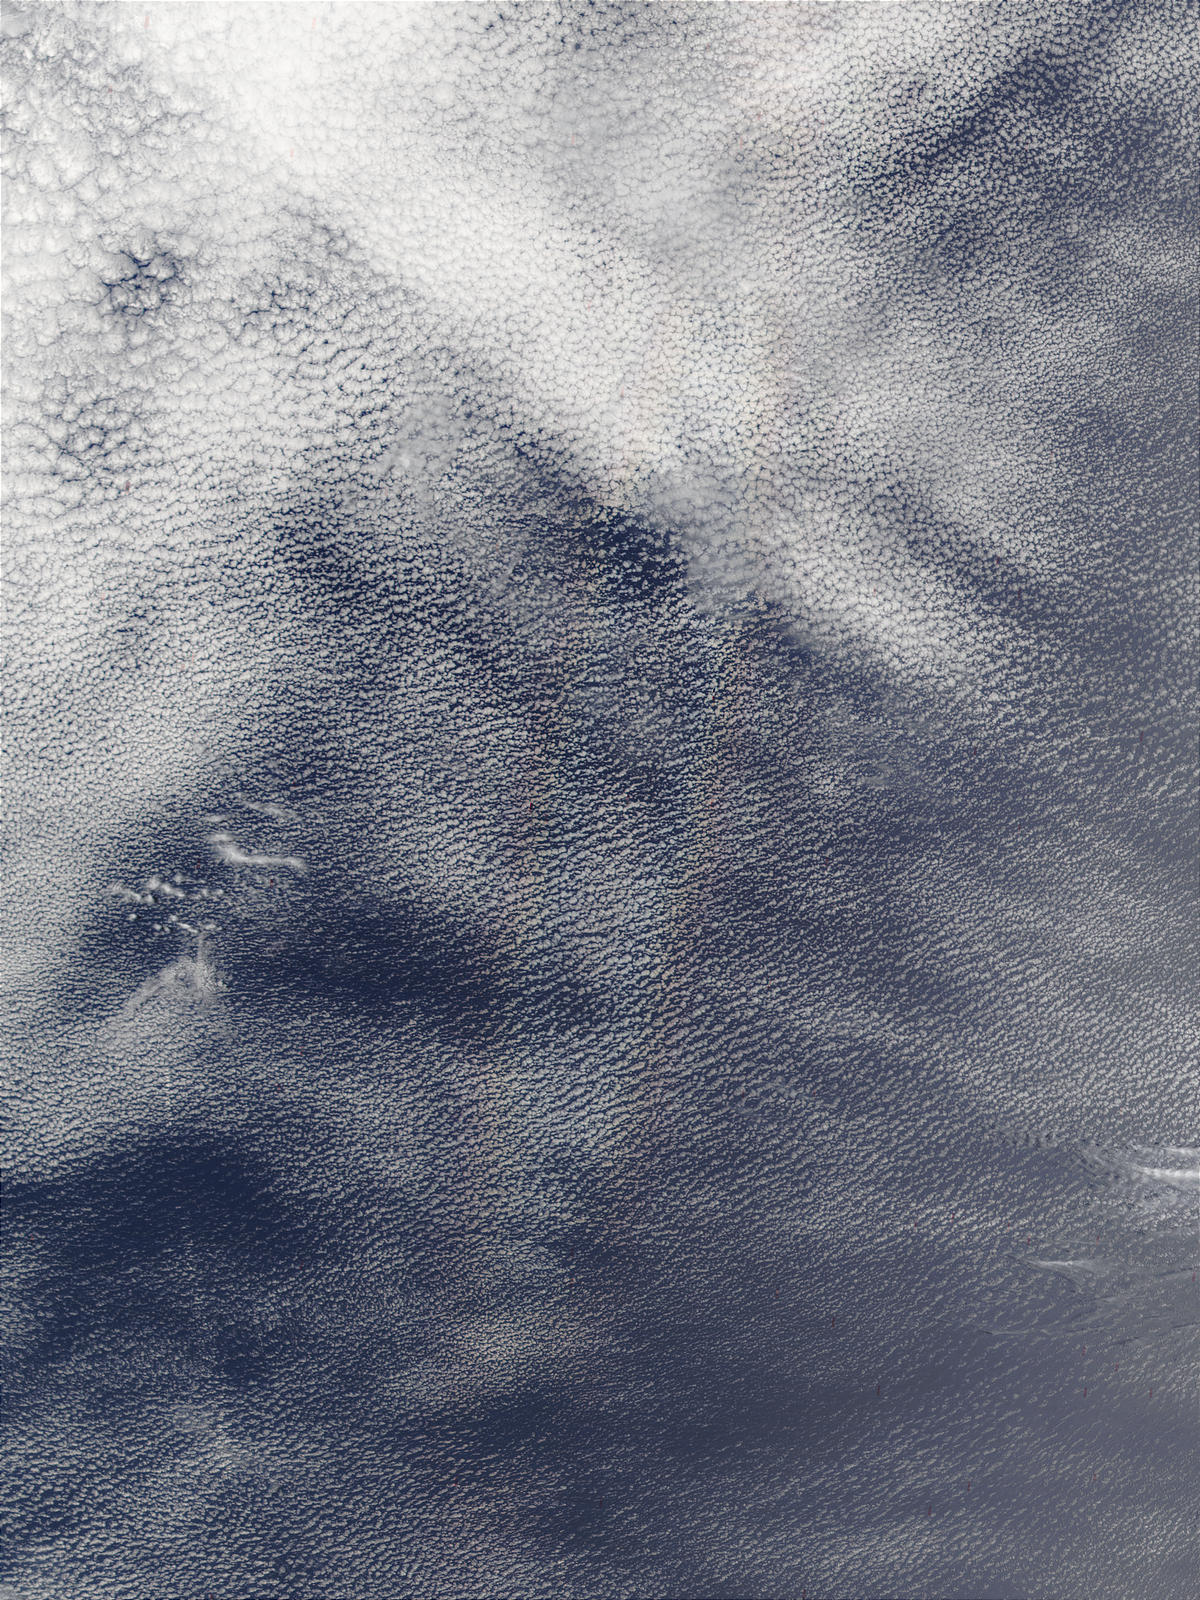 Cloud bow over stratocumulus clouds in Pacific Ocean - related image preview